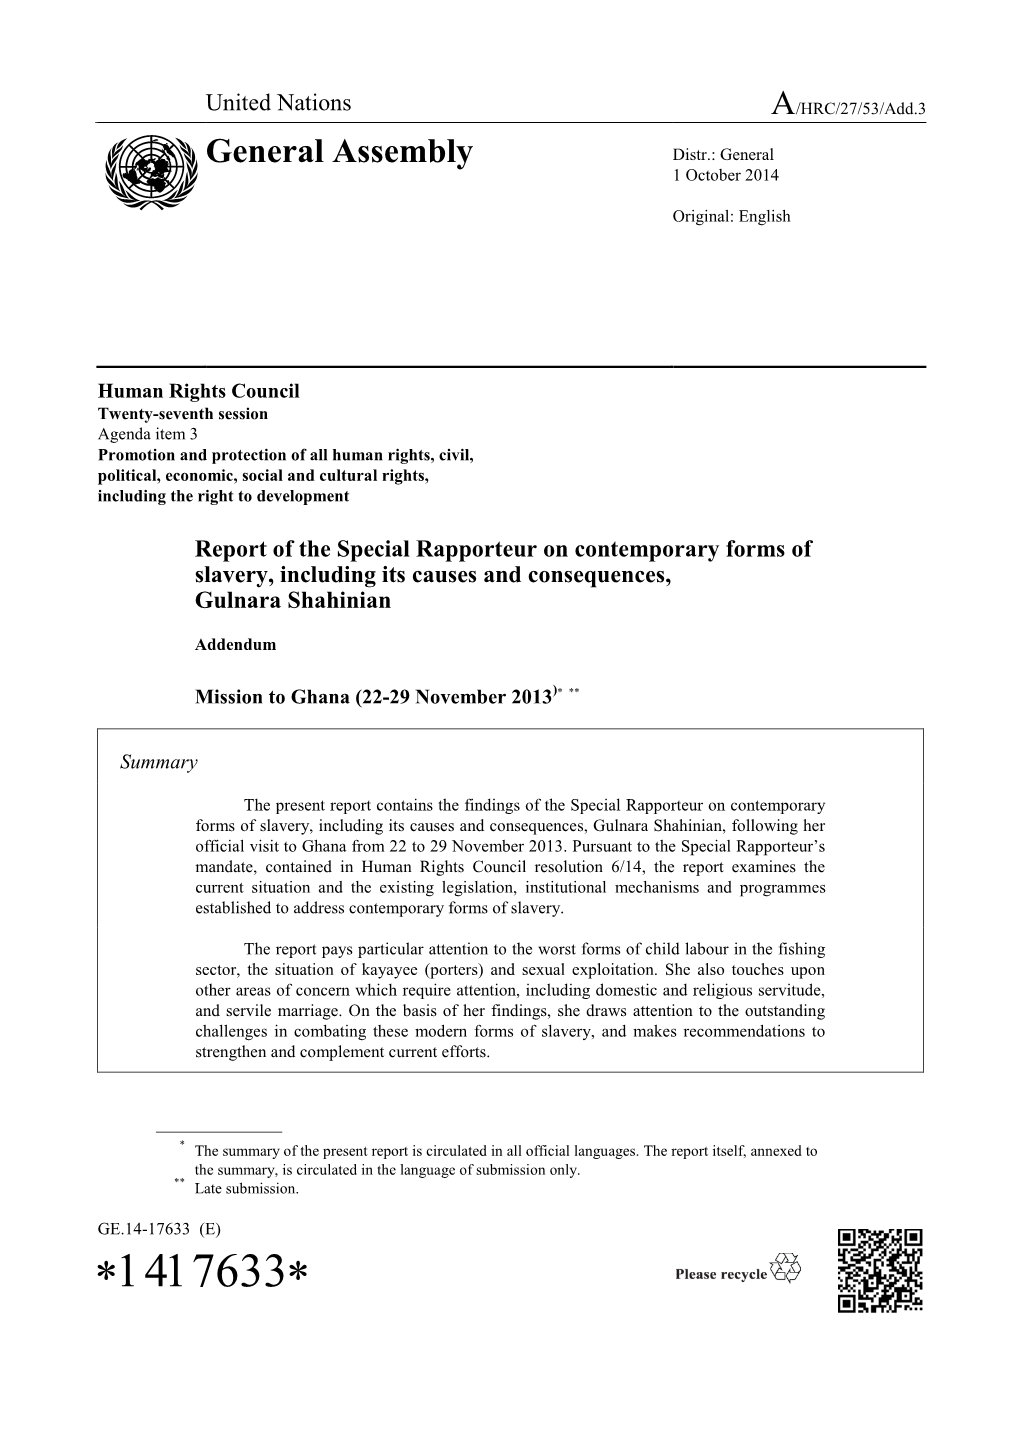 Report of the Special Rapporteur on Contemporary Forms of Slavery, Including Its Causes and Consequences, Gulnara Shahinian